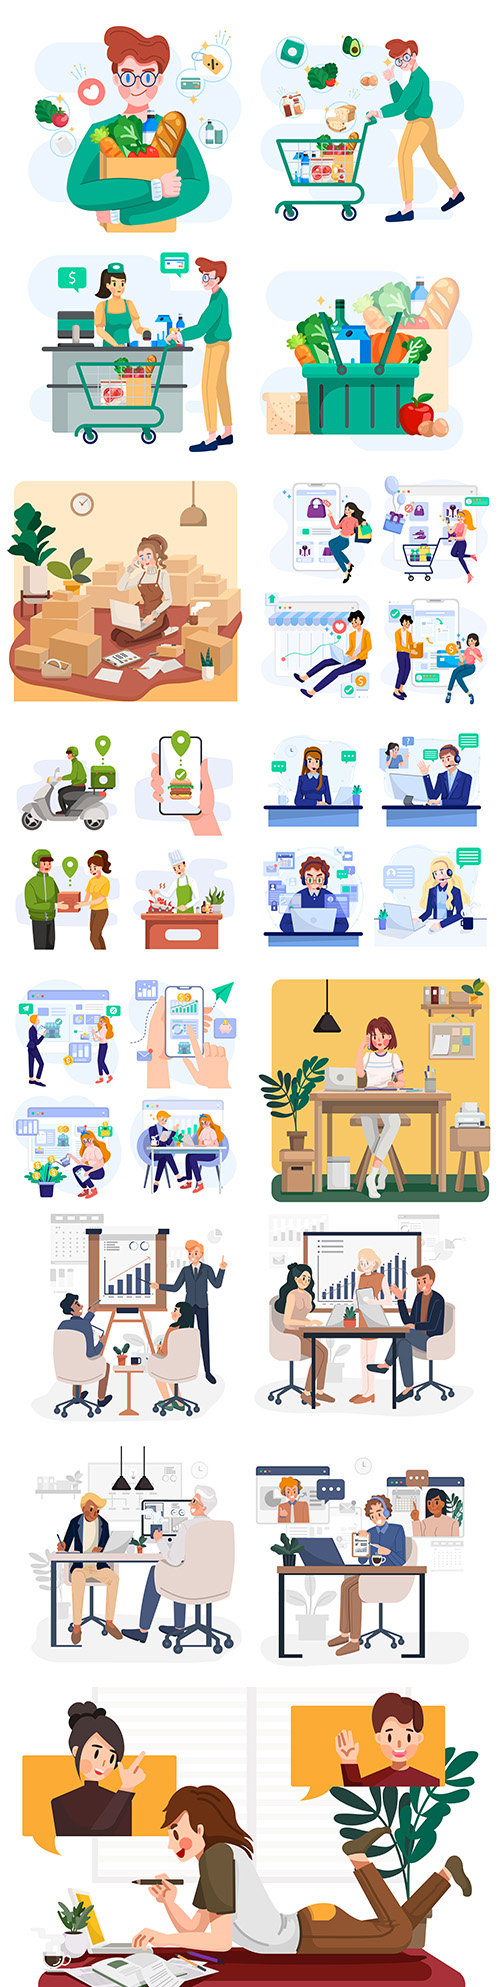 Business people in different settings concept illustration 
